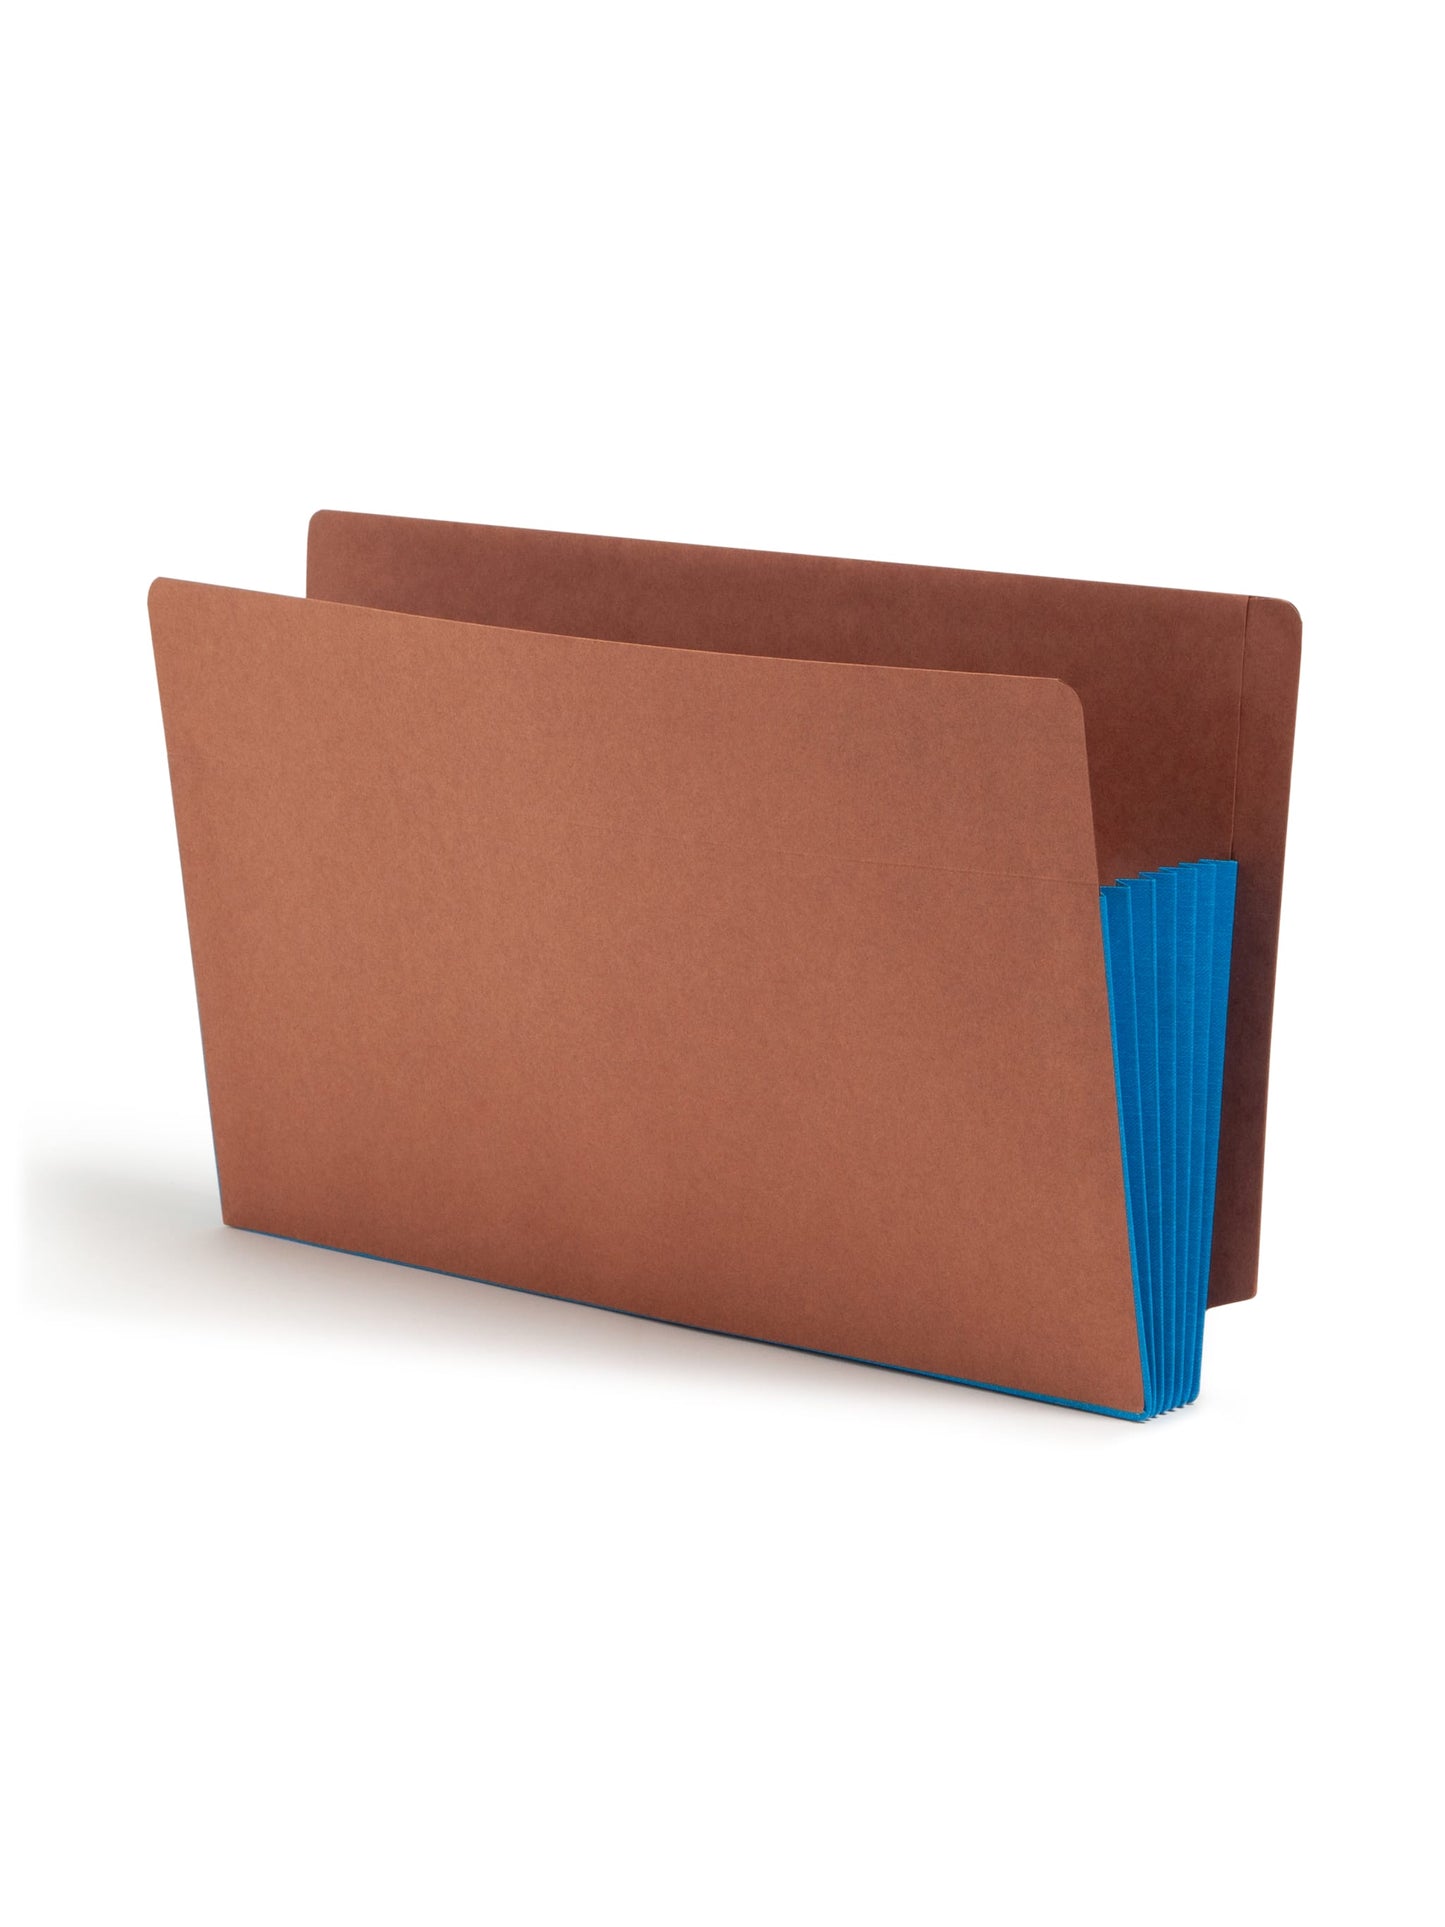 Reinforced End Tab File Pockets, Straight-Cut Tab, 5-1/4 inch Expansion, Blue Color, Extra Wide Legal Size, Set of 0, 30086486746893